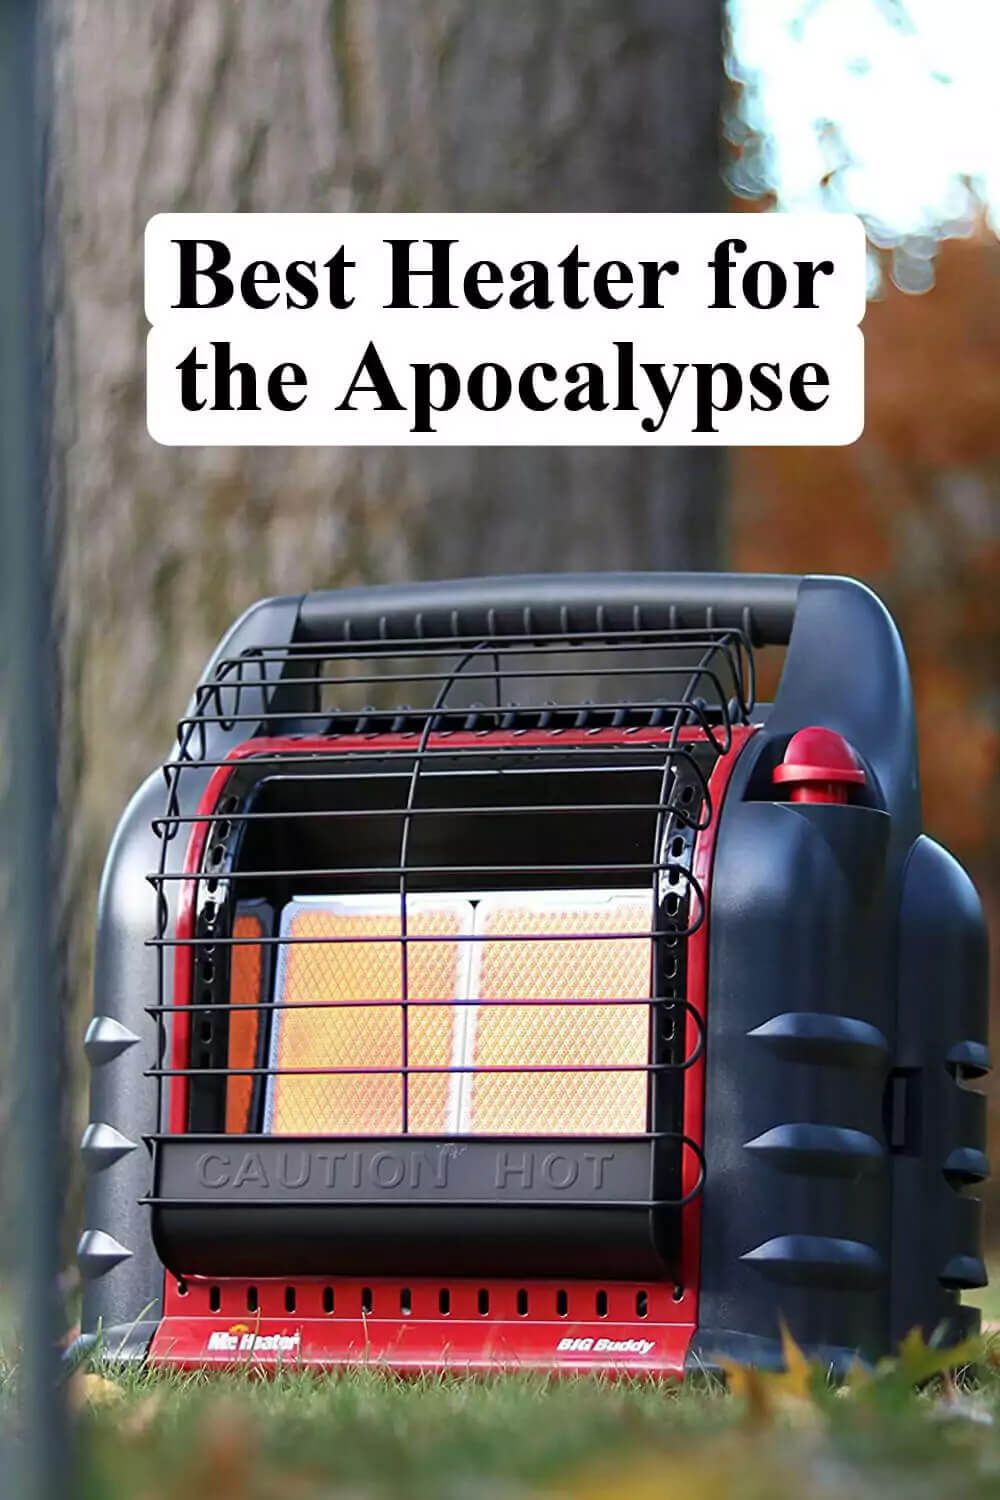 Best Heater for the Apocalypse